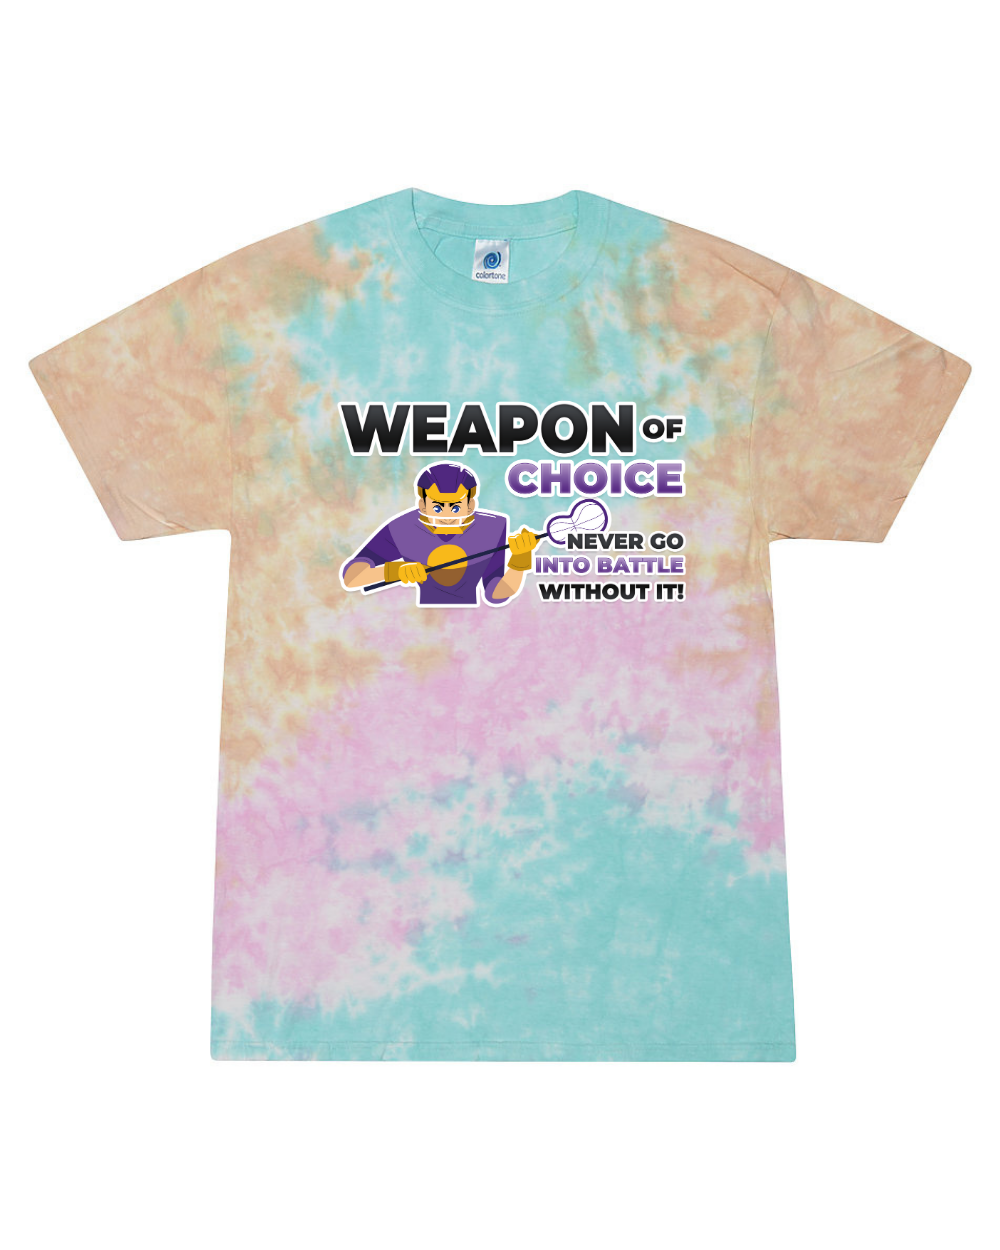 Weapon Of Choice Never Go Into Battle Without It (Boy) - Tie Dye Tee